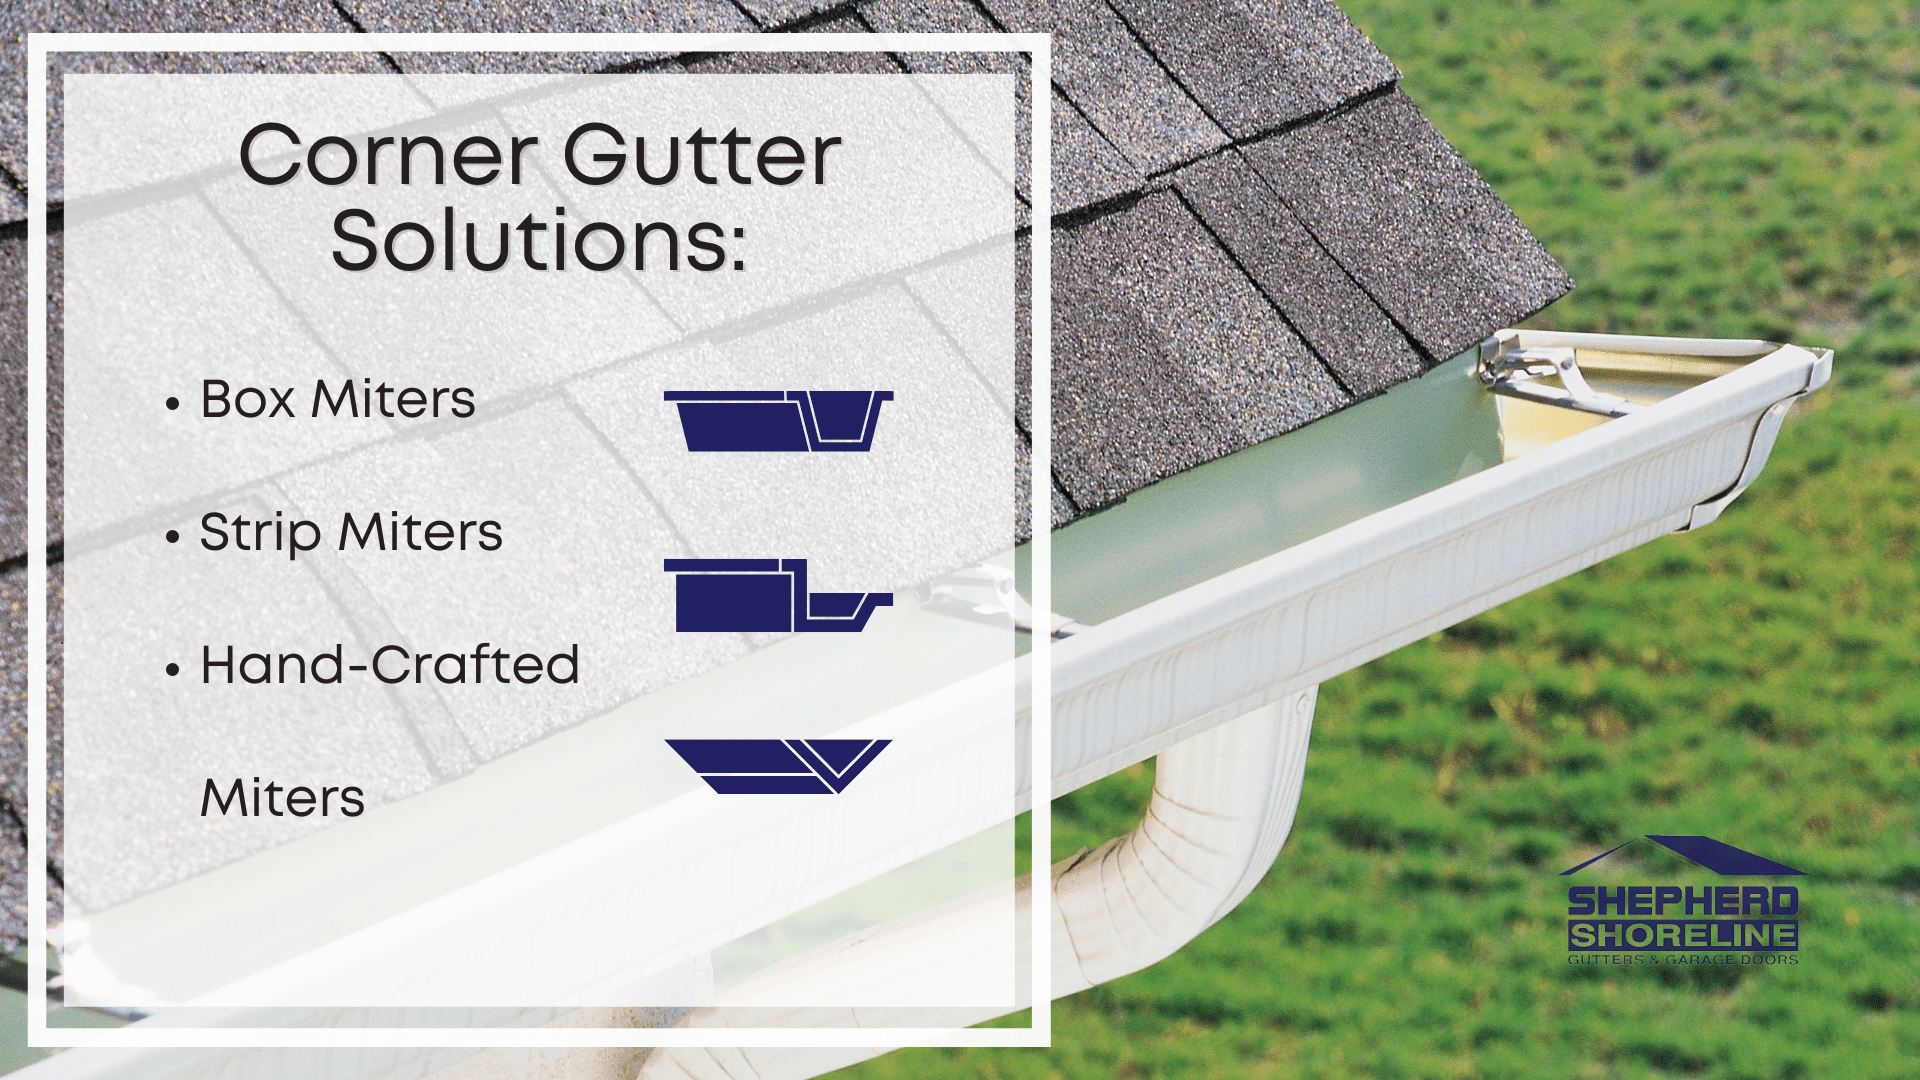 Infographic of the different corner gutter solutions